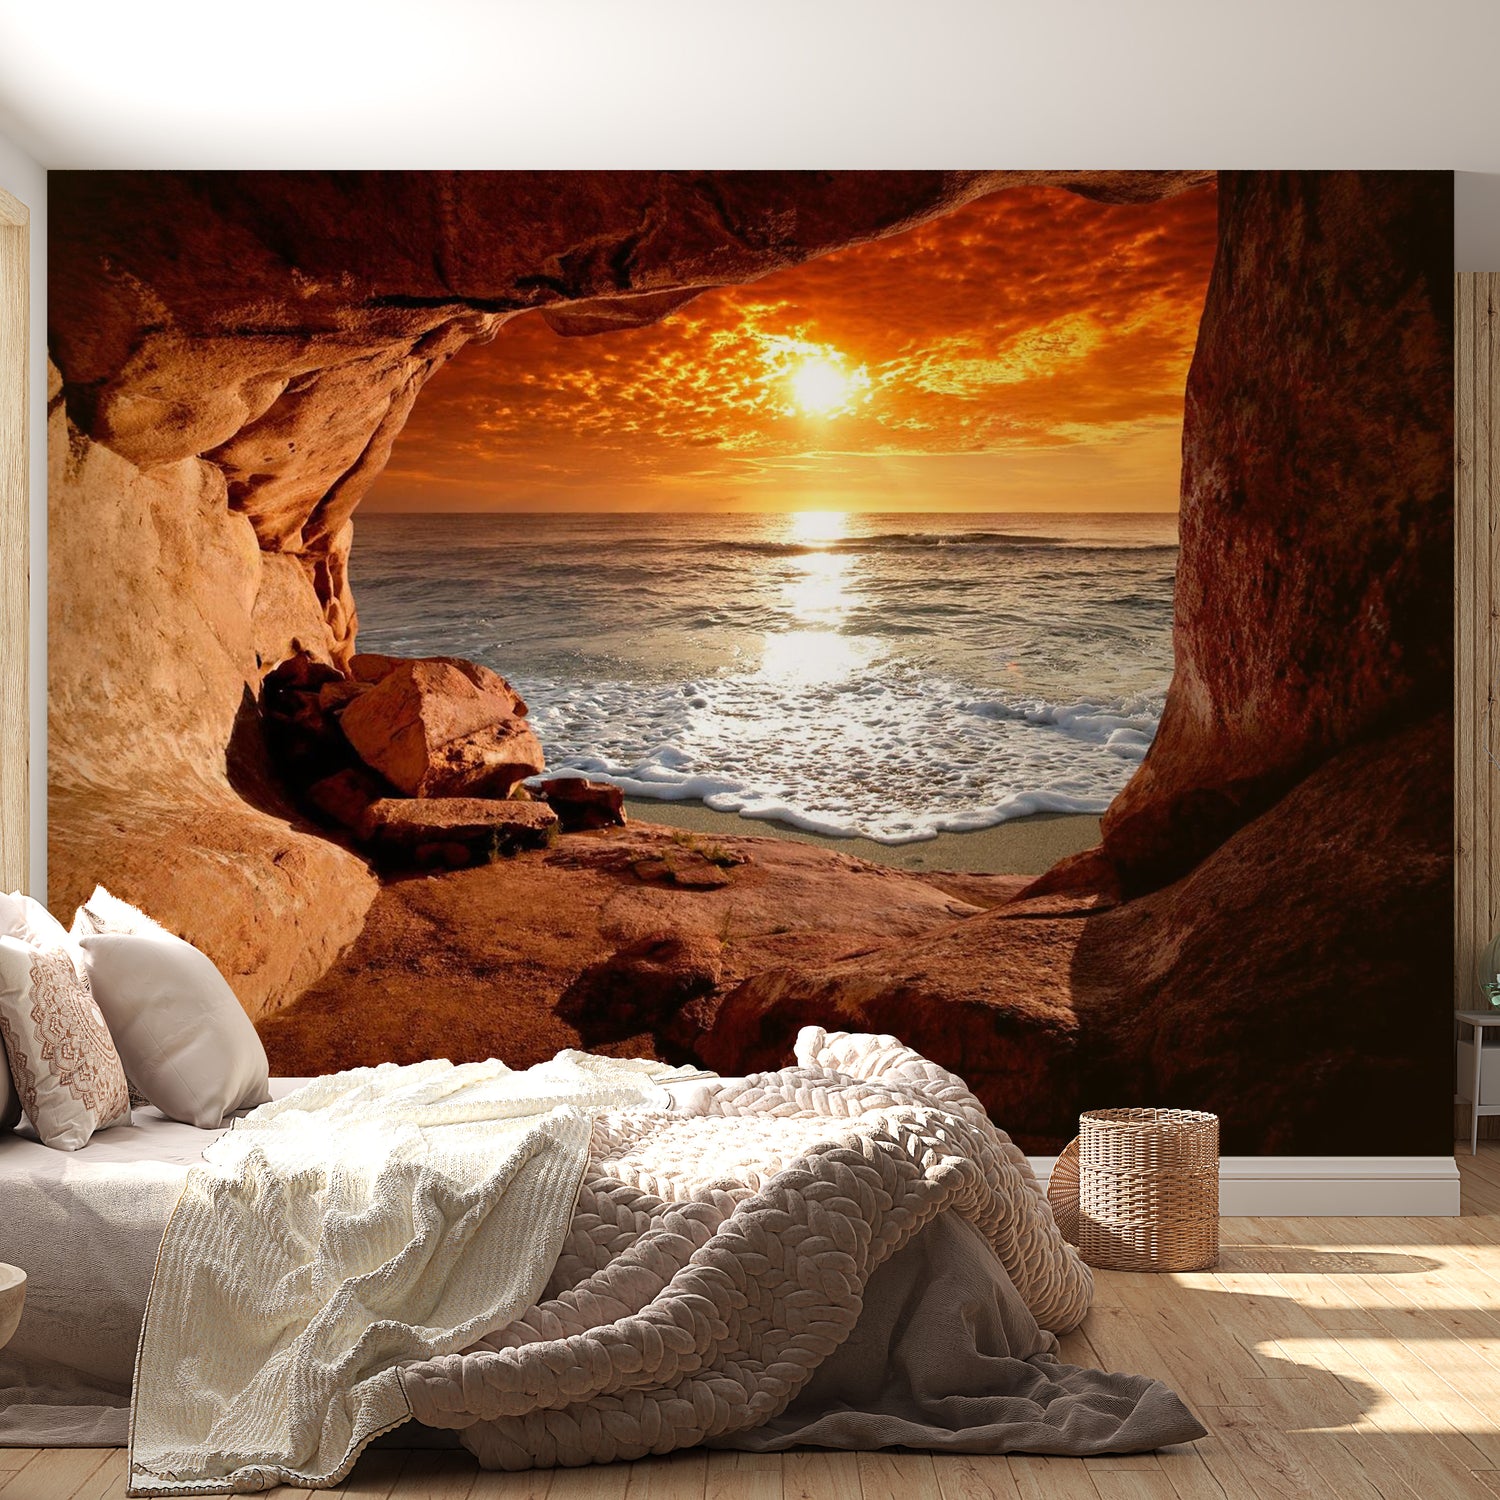 Peel & Stick Tropical Wall Mural - Exit From The Cave - Removable Wall Decals